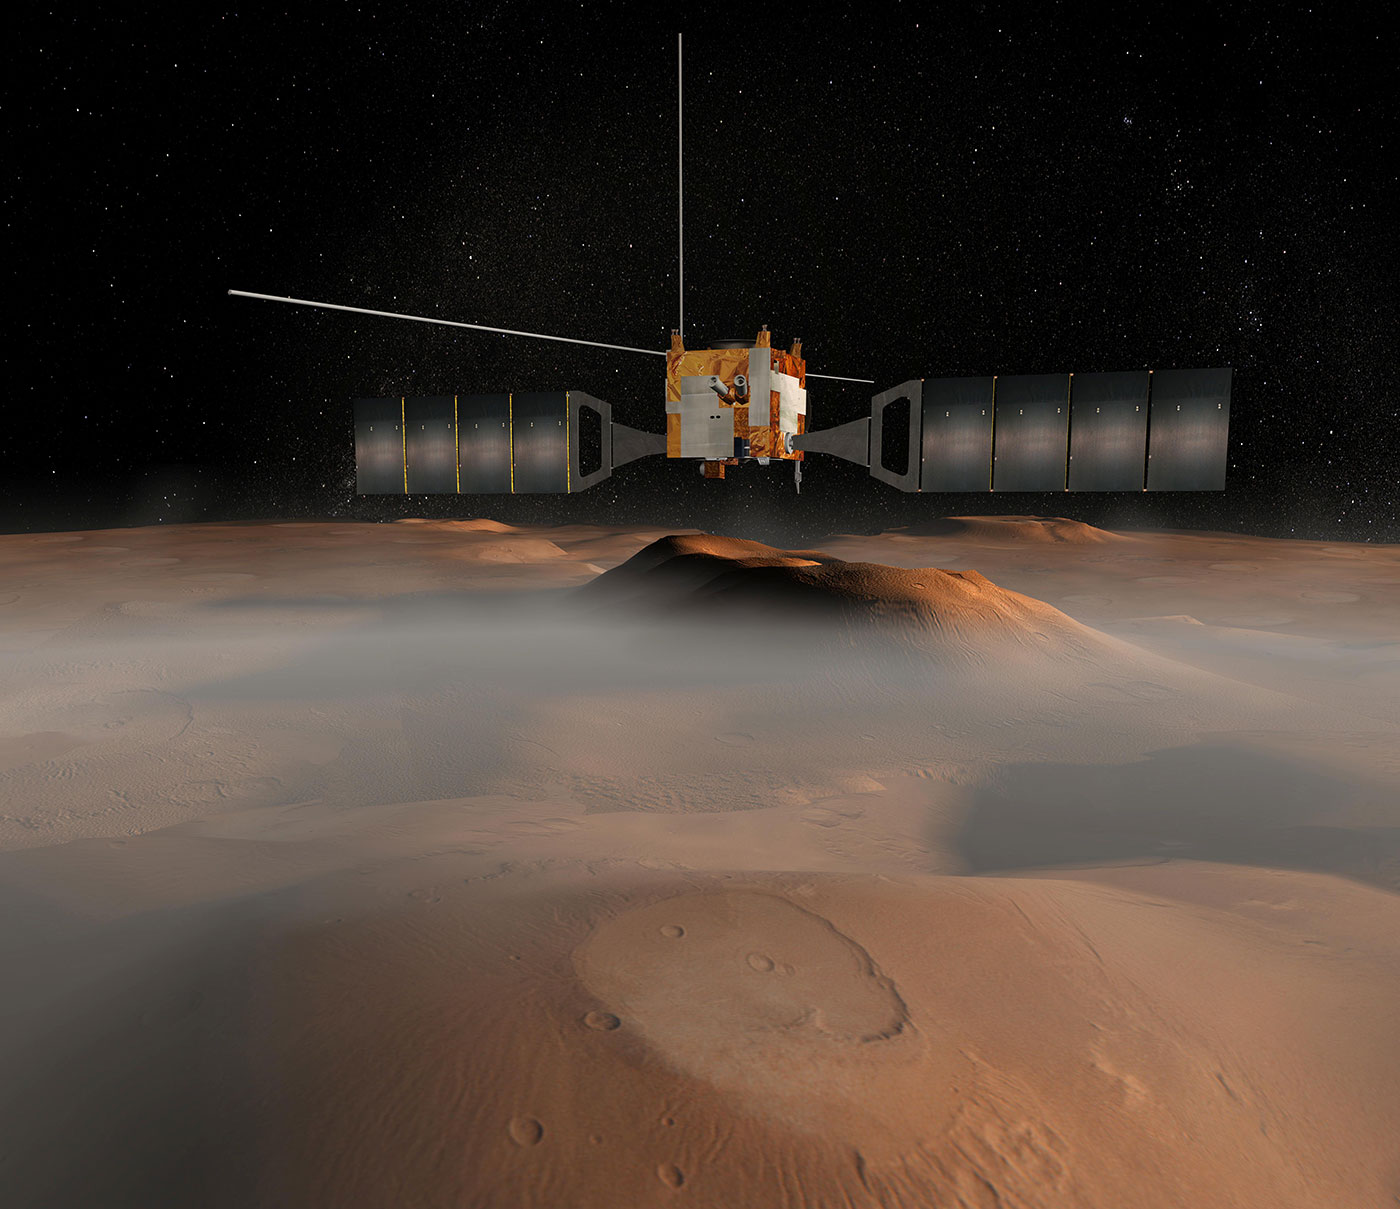 ESA’s (the European Space Agency’s) Mars Express flies over the Red Planet in this illustration.